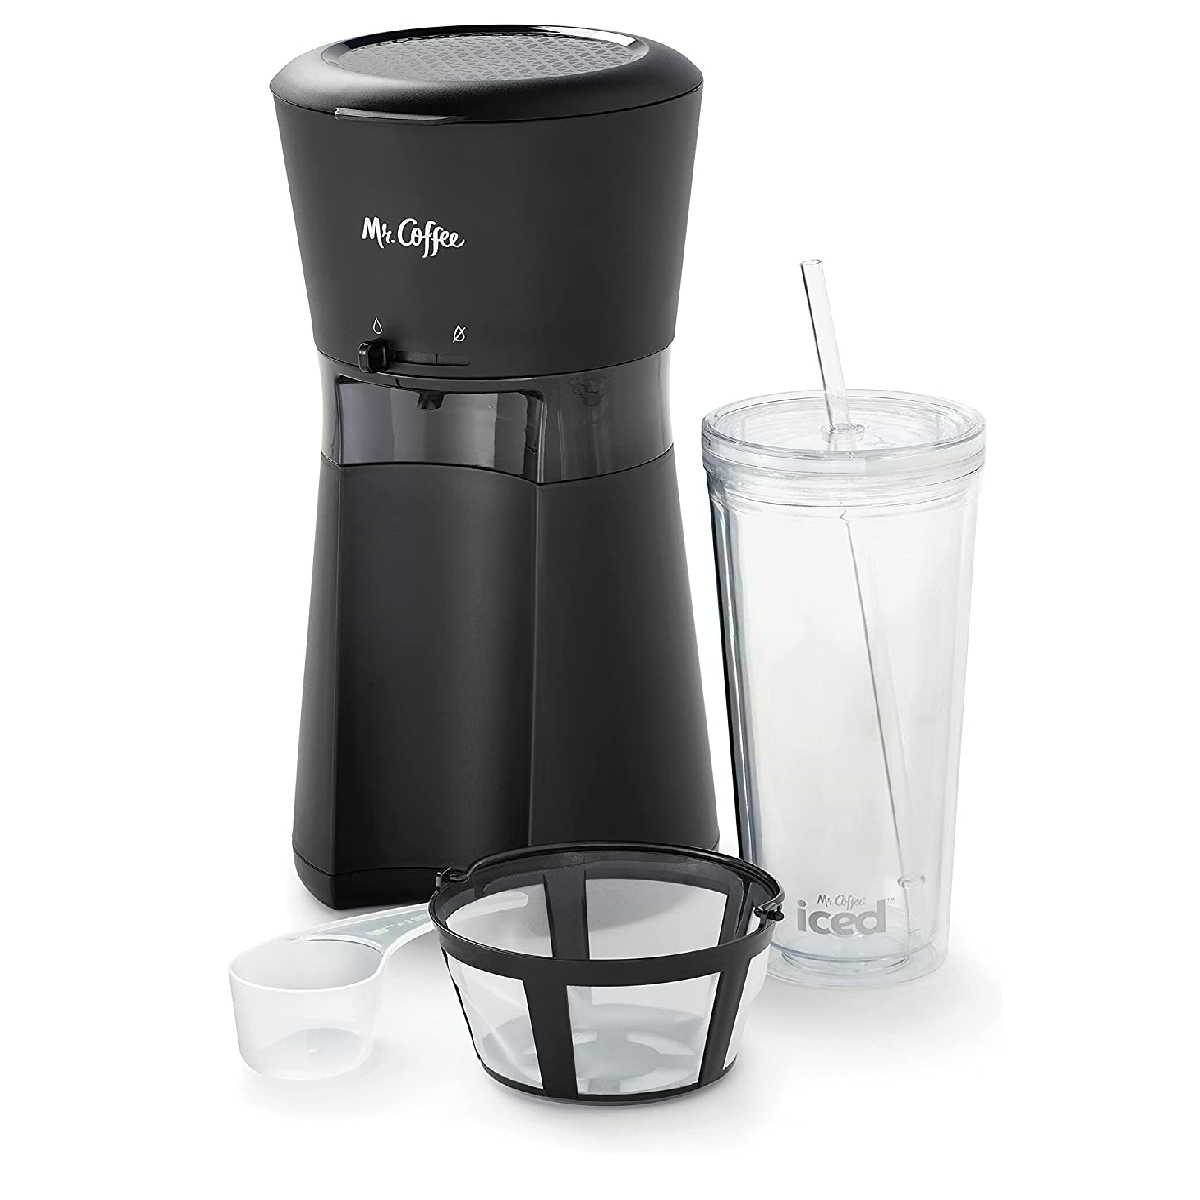 Mr coffee iced coffee maker start button not working